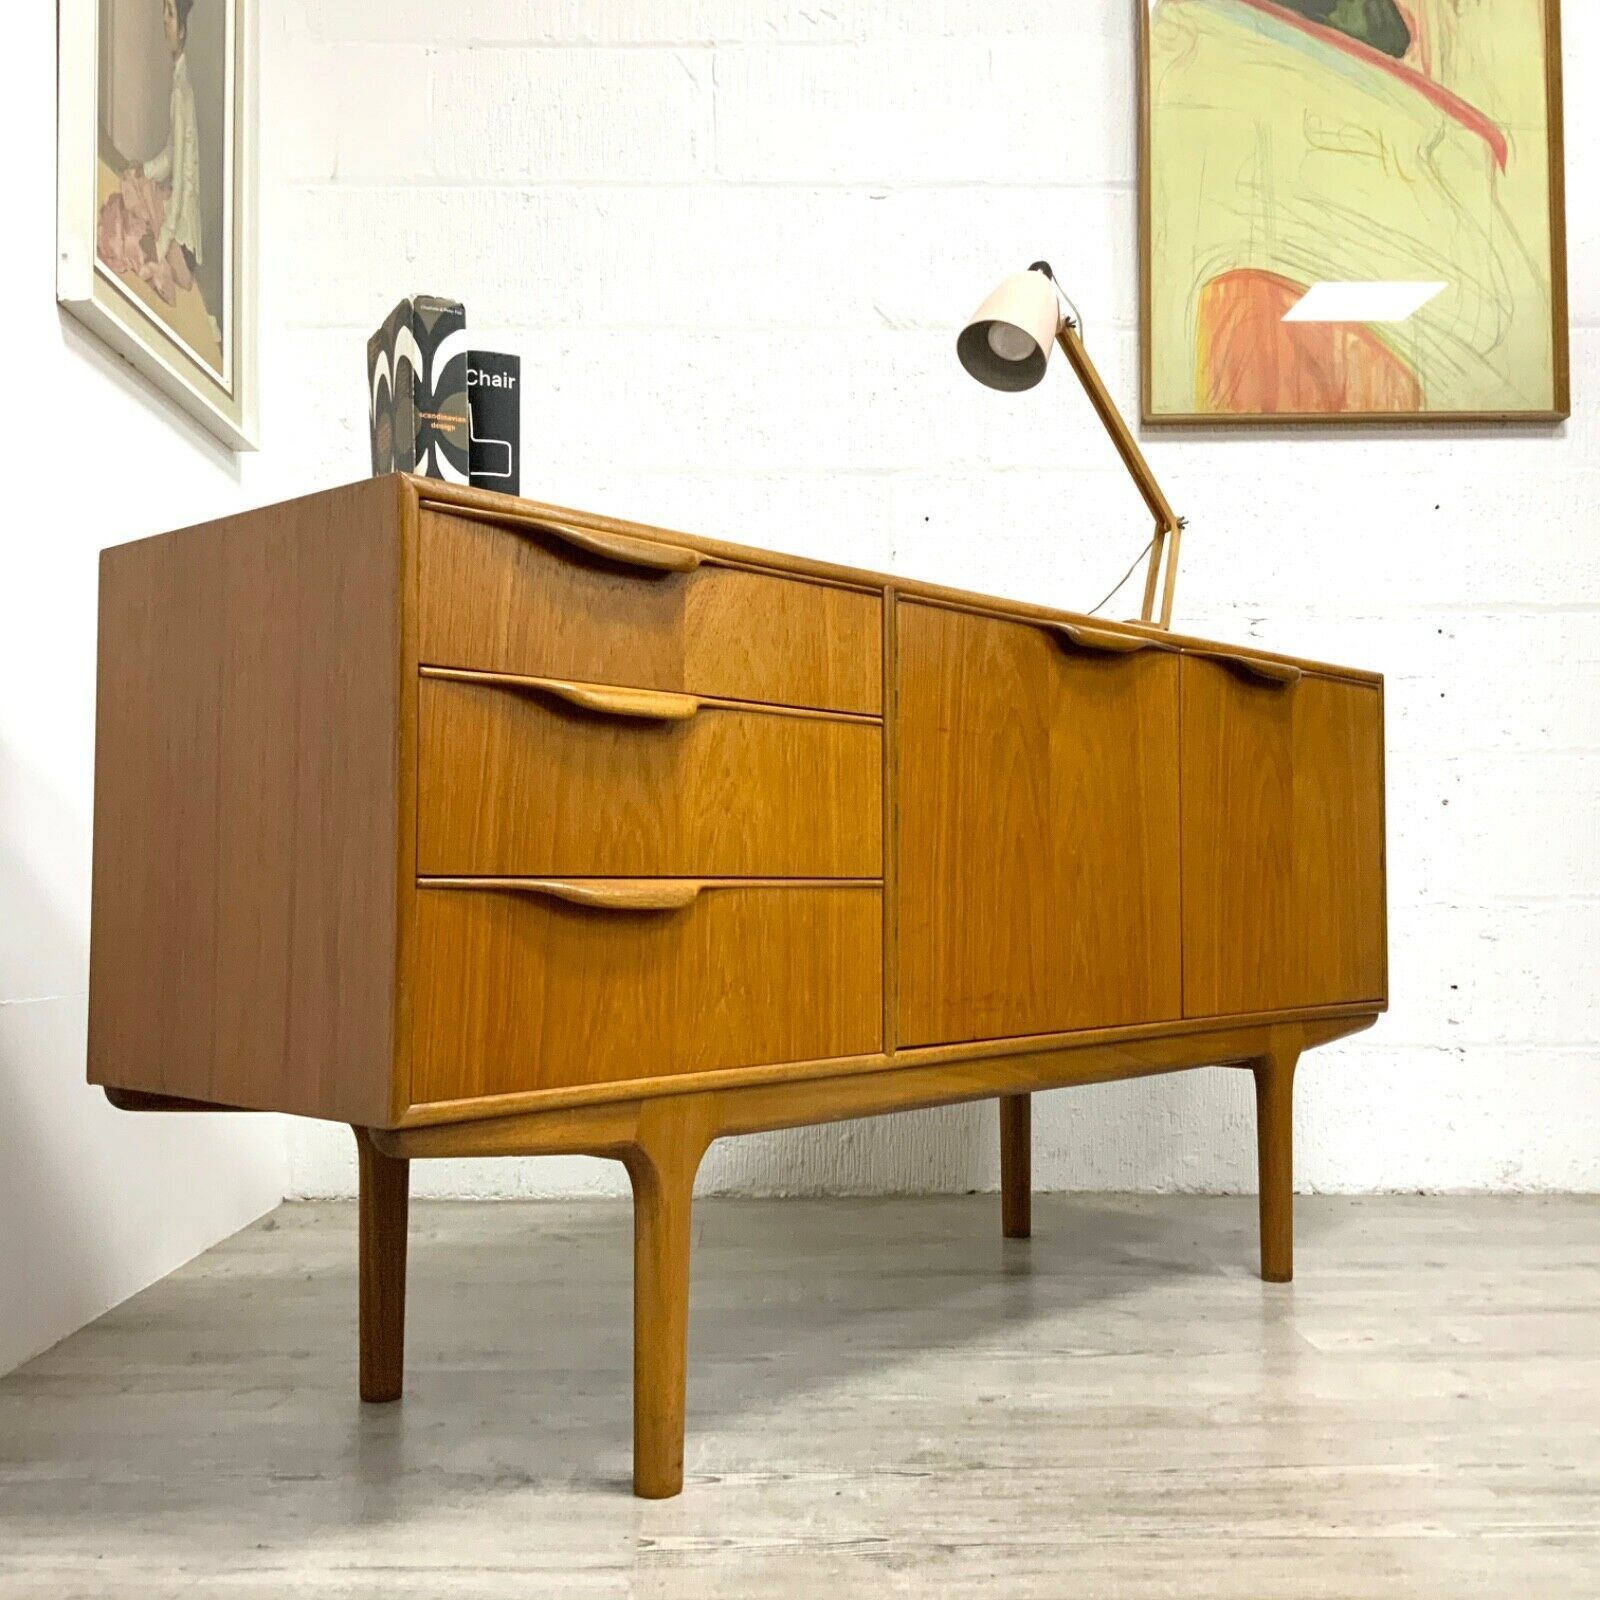 Mid Century Modern Sideboards For Sale | Vinterior With Regard To Mid Century Modern Sideboards (View 15 of 15)